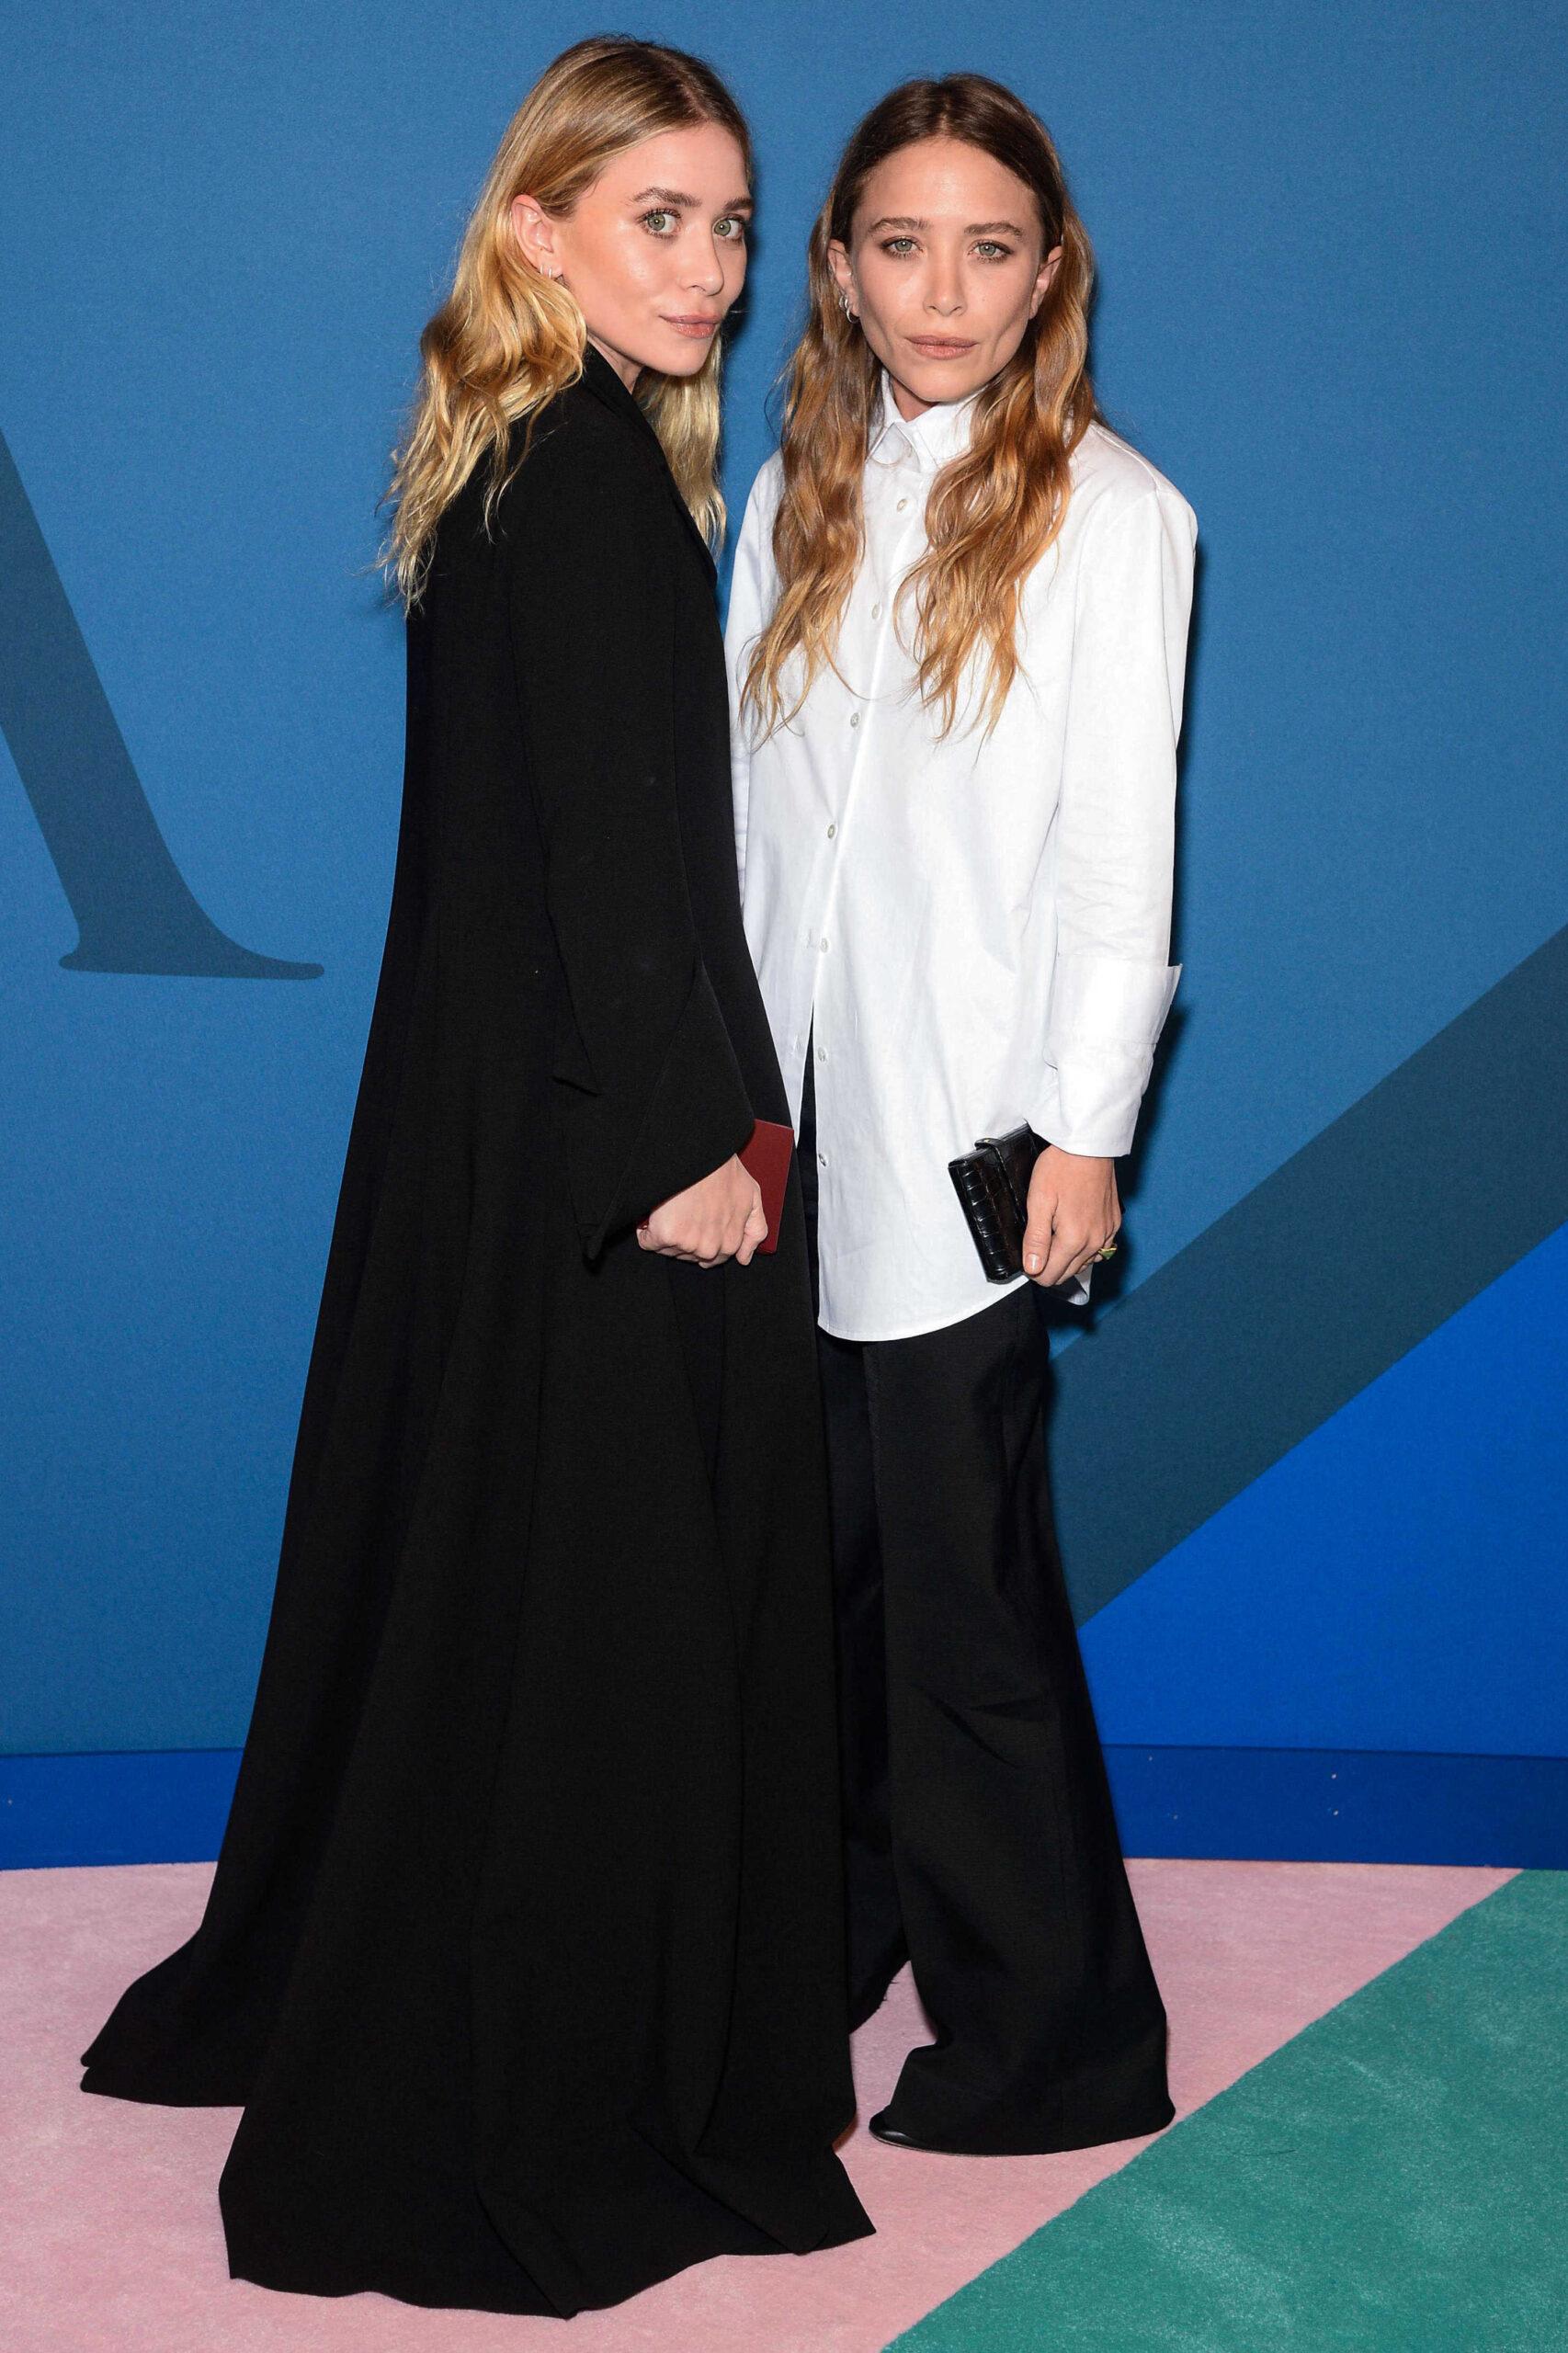 Ashley Olsen and Mary-Kate Olsen wearing The Row attend the 2017 CFDA Fashion Awards